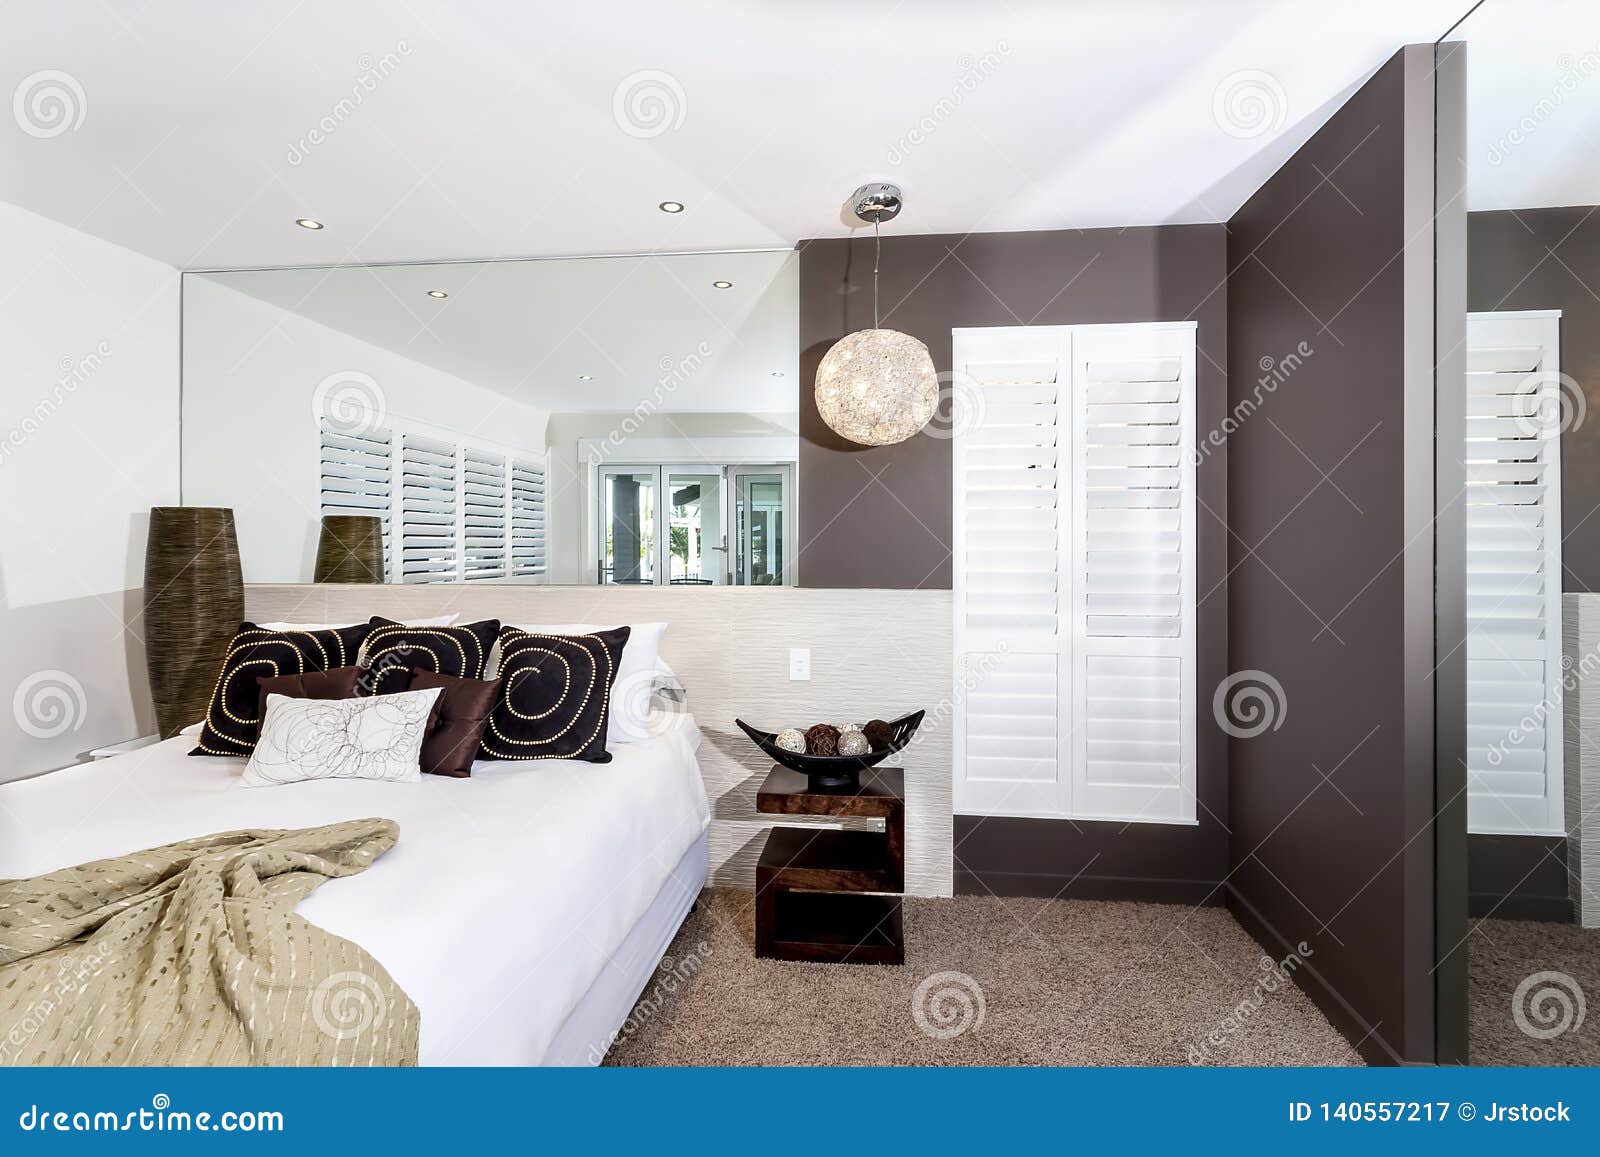 Modern Bedroom With White Sheets And Pillows Stock Image